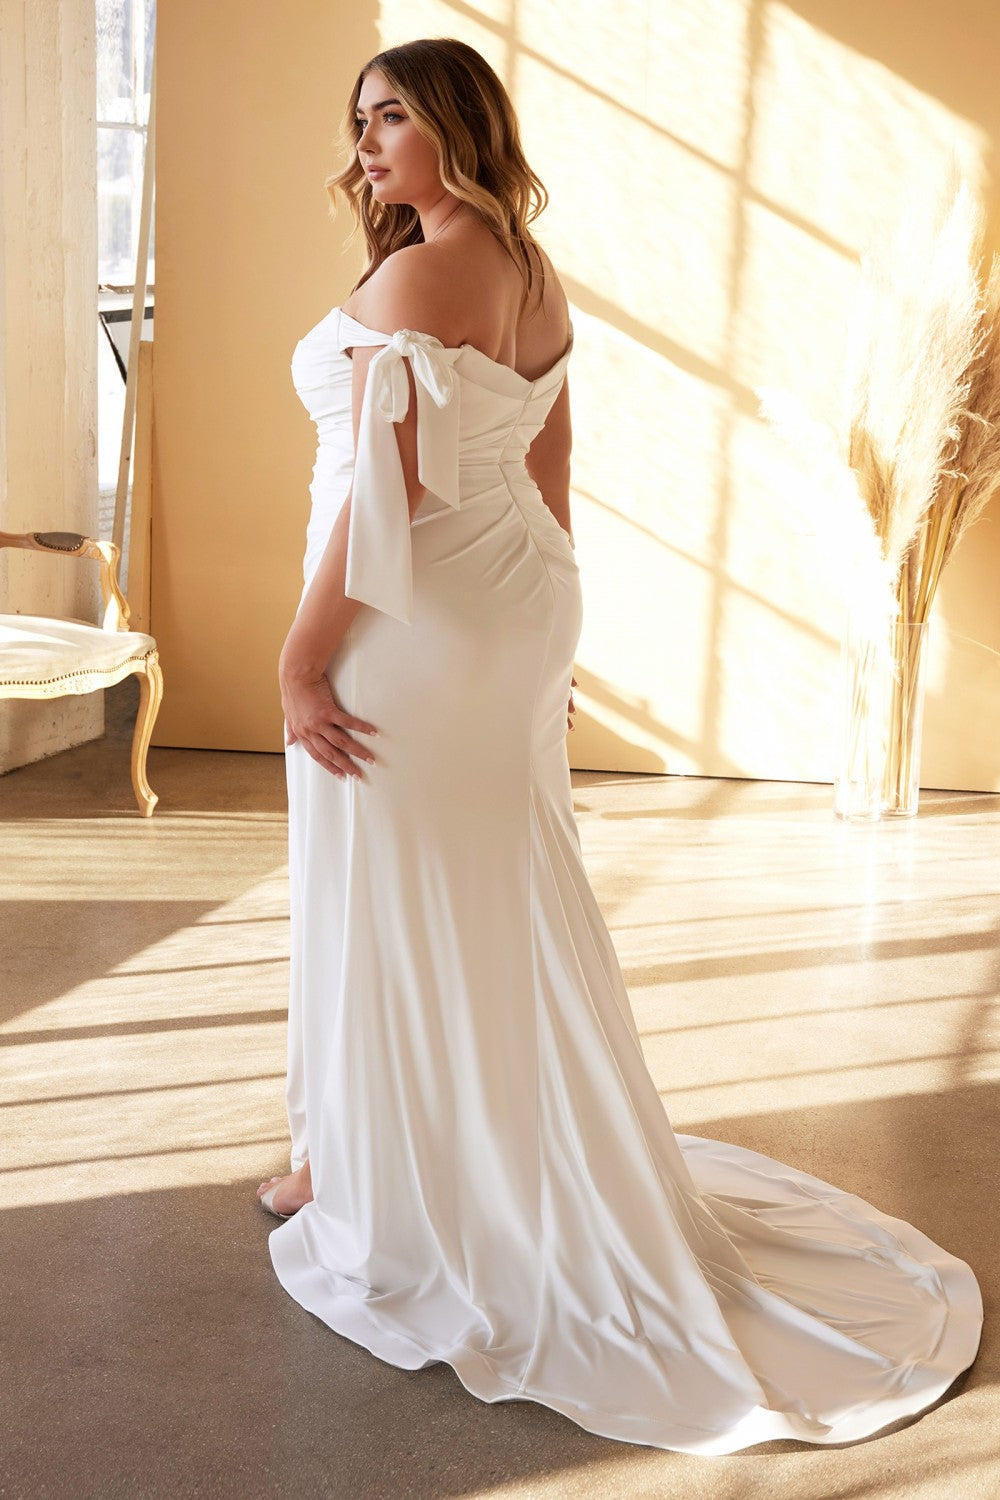 Plus Size Fitted Wedding Gown Off Shoulders Cowl Neckline Bodice with Tied Straps Stretch Satin Bridal Dress with Leg Slit CDCD944WC Elsy Style Wedding Dress